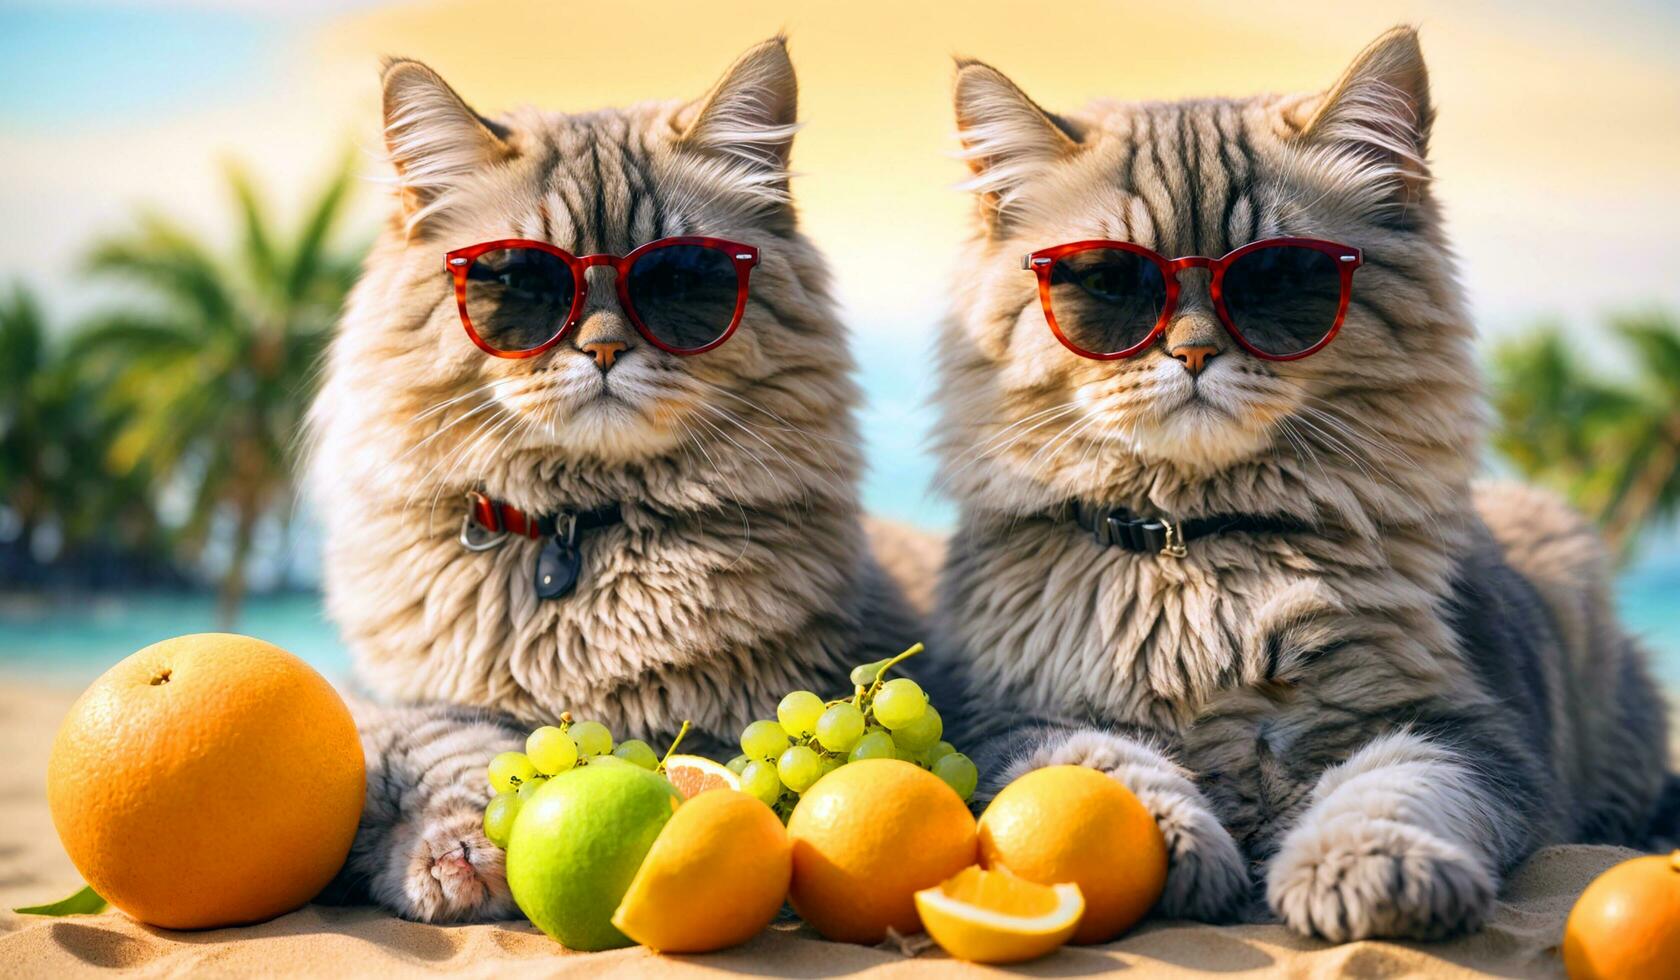 Funny large longhair gray kitten with beautiful big green eyes wearing sunglasses with fresh juice and fruits on beach background, summer concept photo